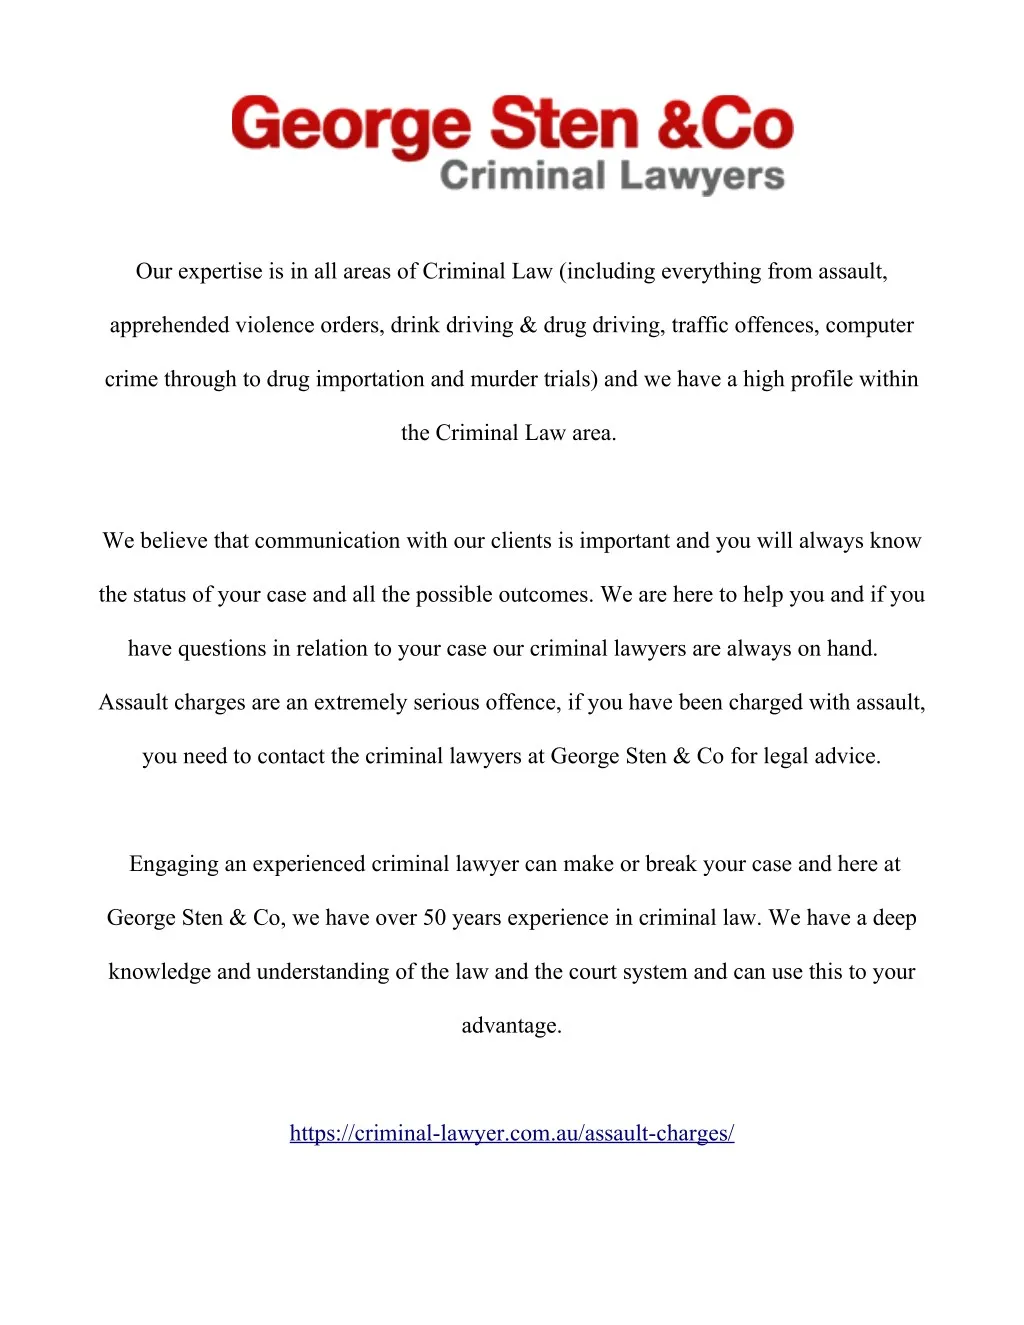 our expertise is in all areas of criminal